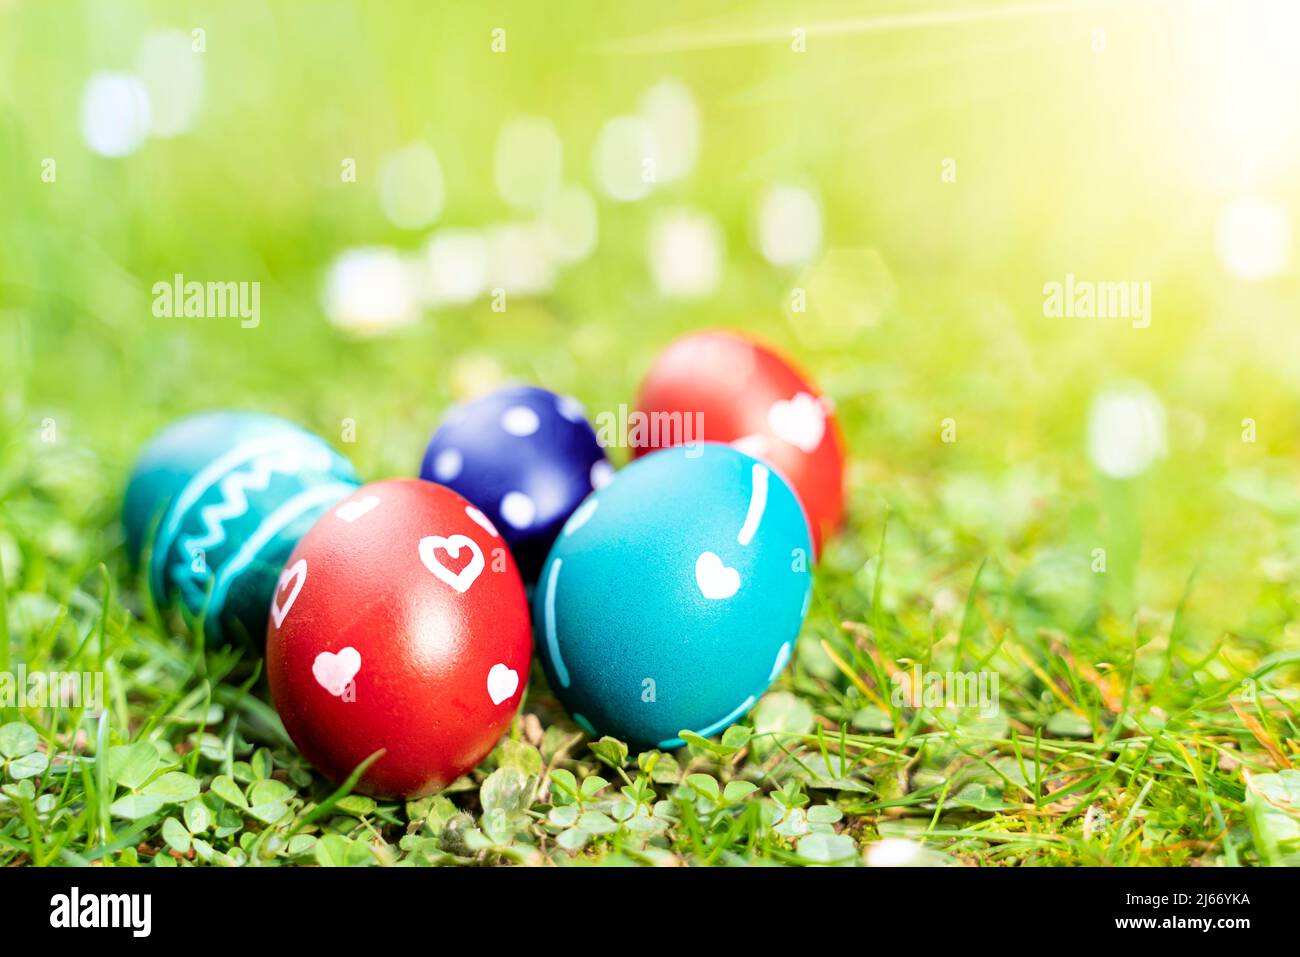 Beautiful painted real easter eggs lie in the fresh spring grass. The sun is shining. Red and turquoise eggs are decorated with white ornaments. Stock Photo